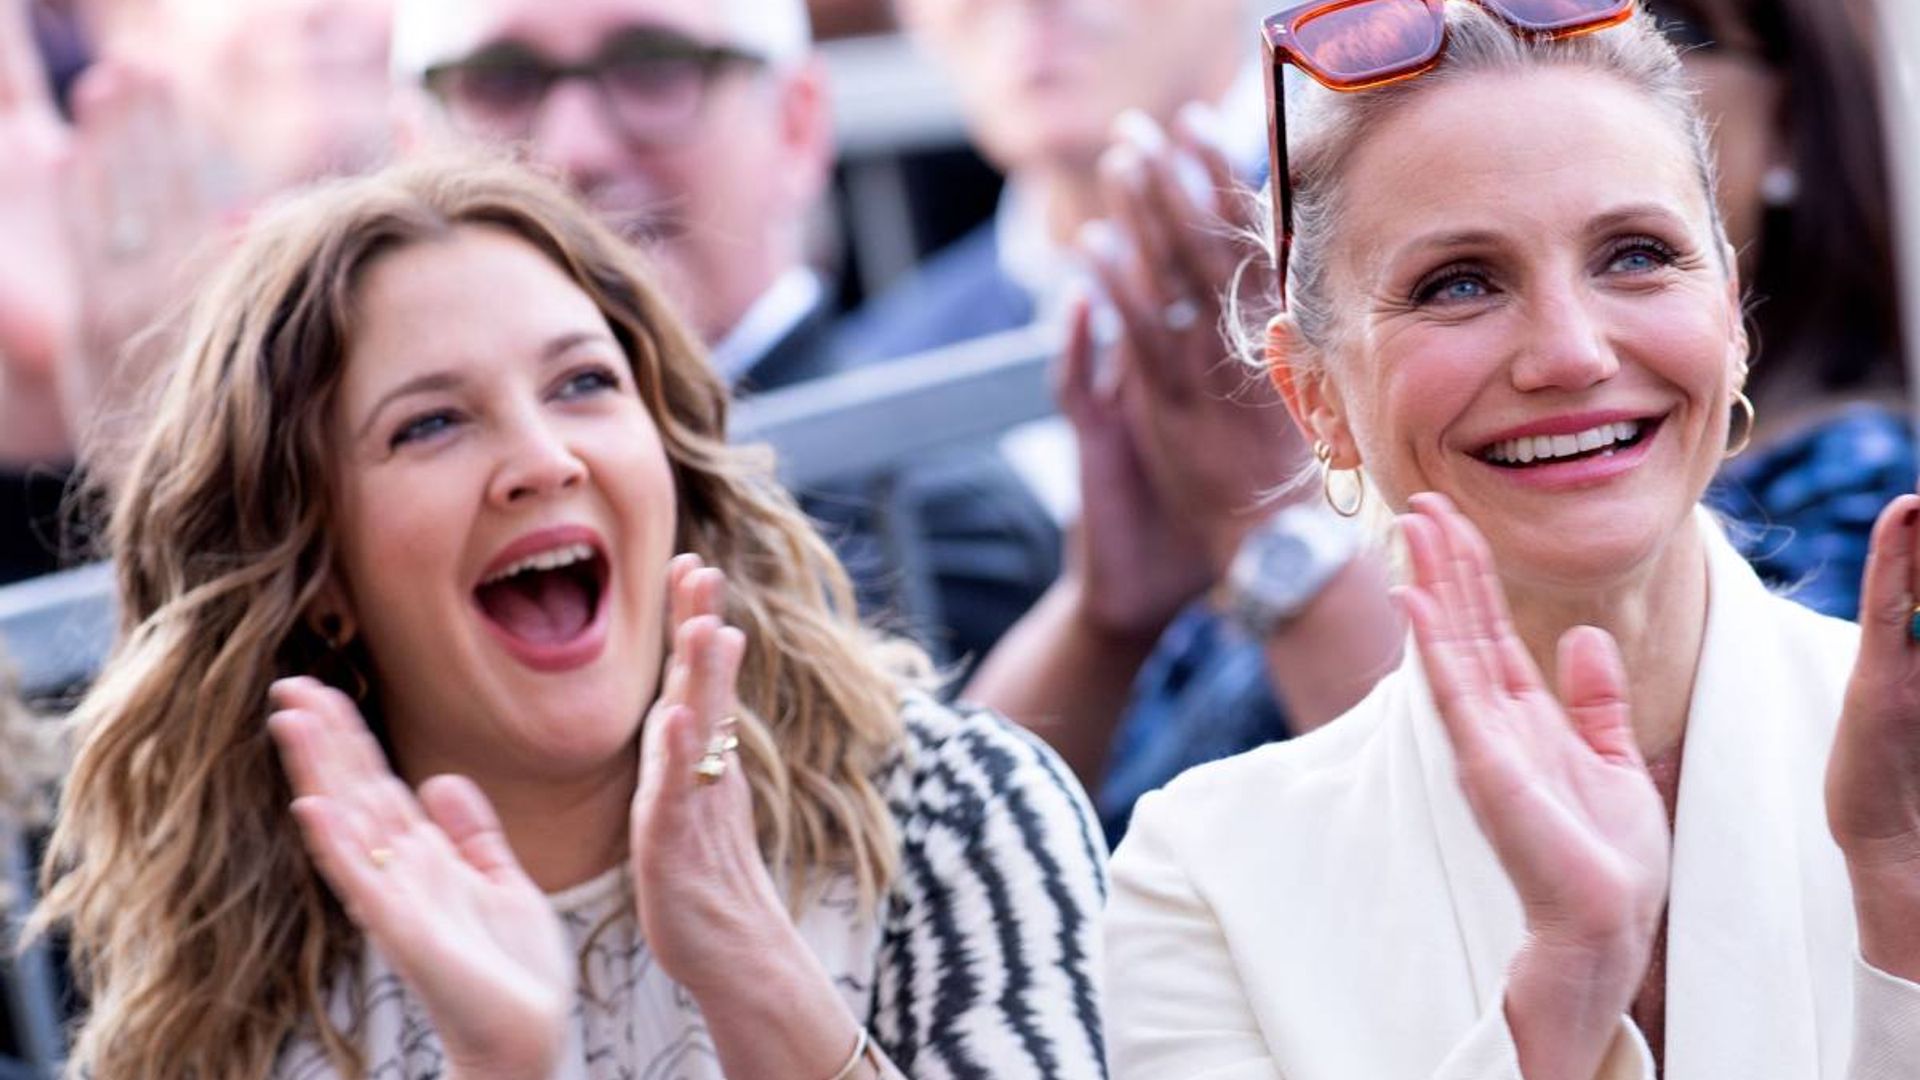 Drew Barrymore reunites with Cameron Diaz in a figure-flattering dress with a twist